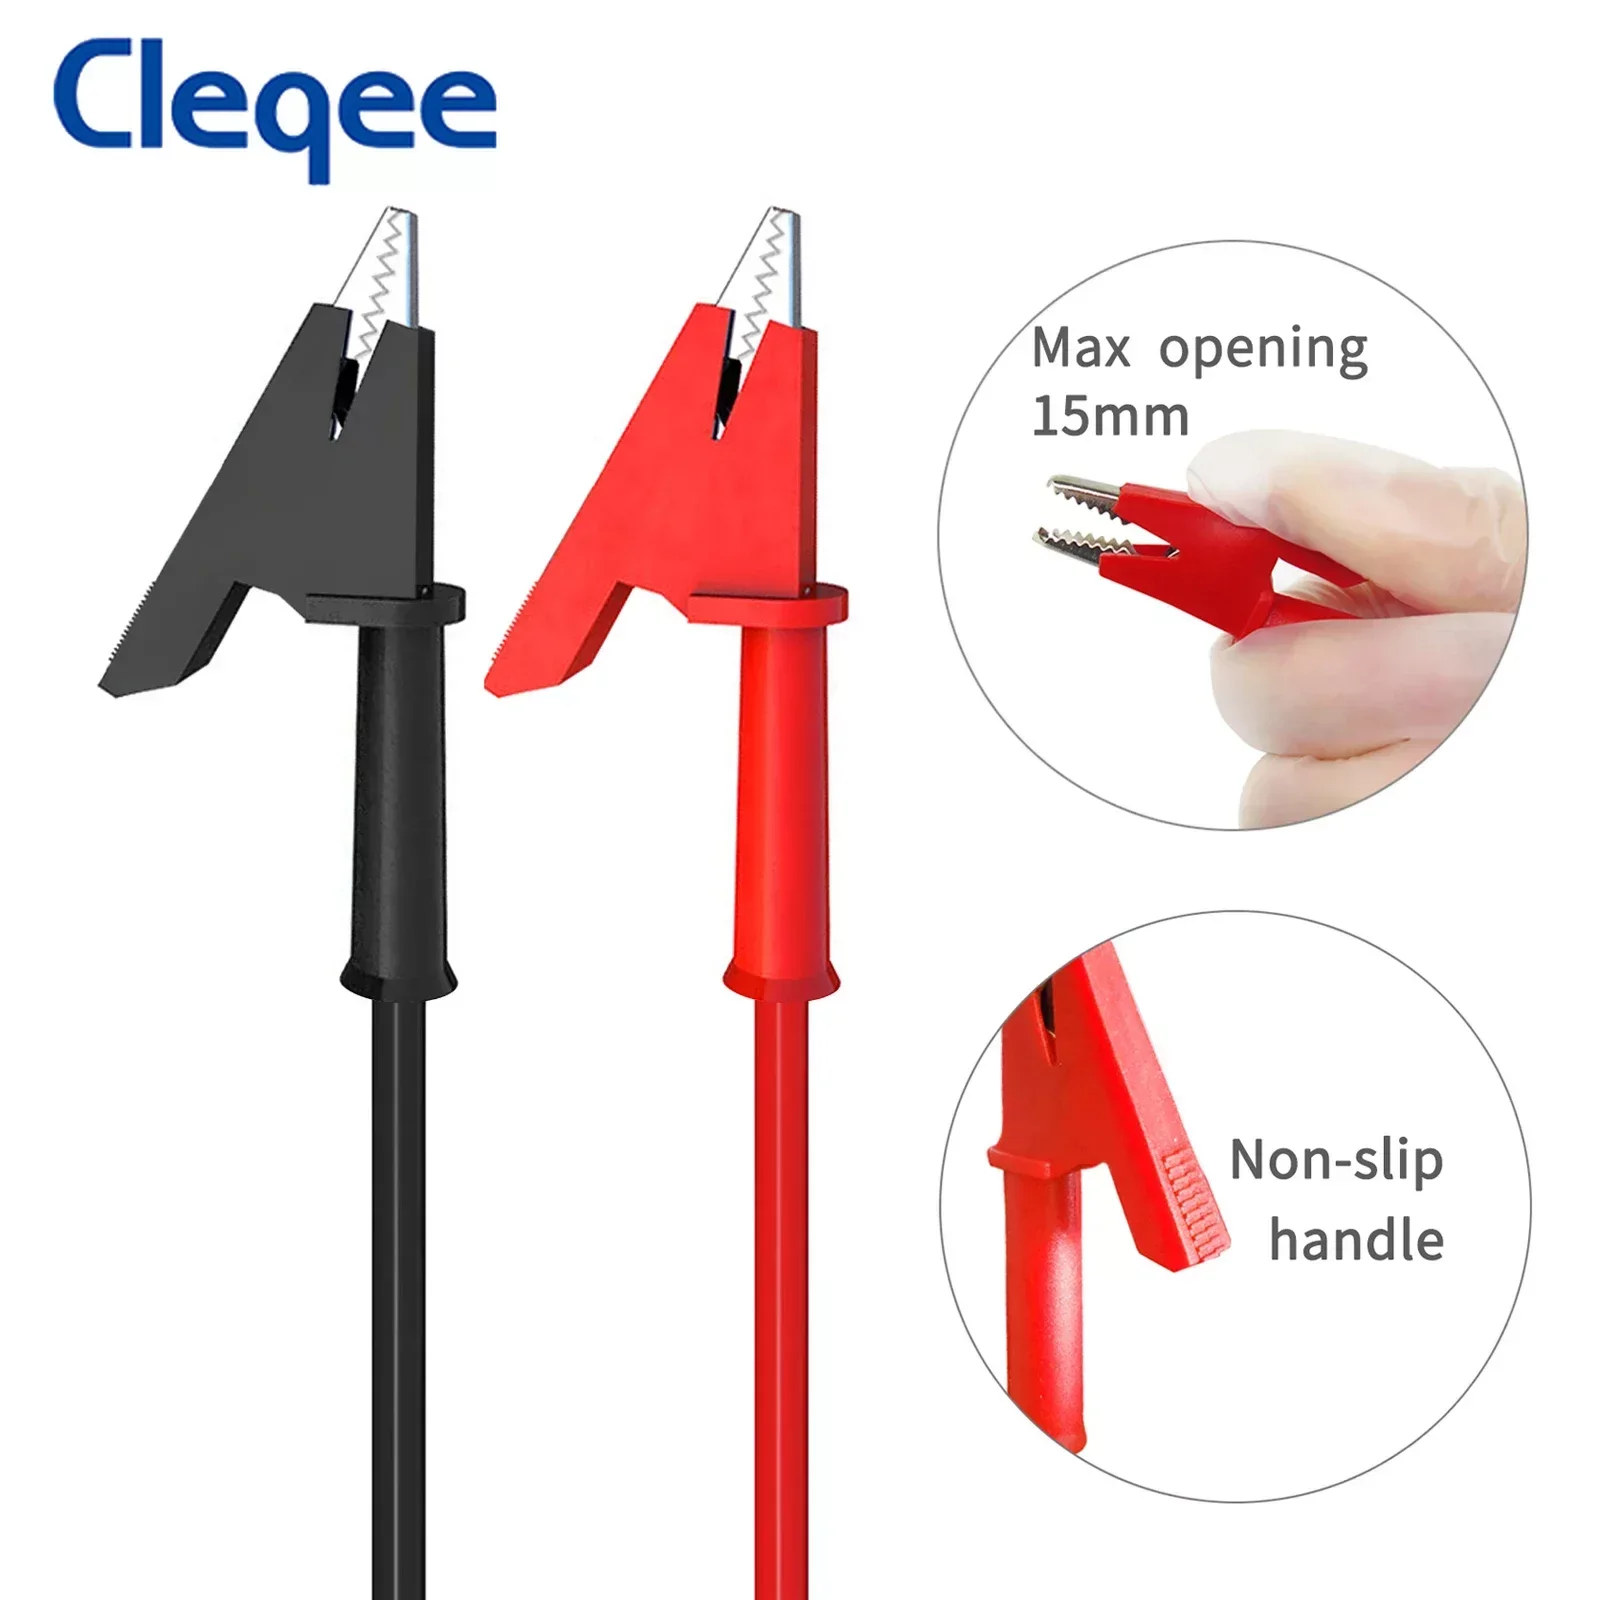 Cleqee P1024 5pcs Dual Alligator Clip Test Lead Crocodile Clamp Cable Wire 1M/2M/3M/5M Multimeter Electronic Testing HAVC Tool